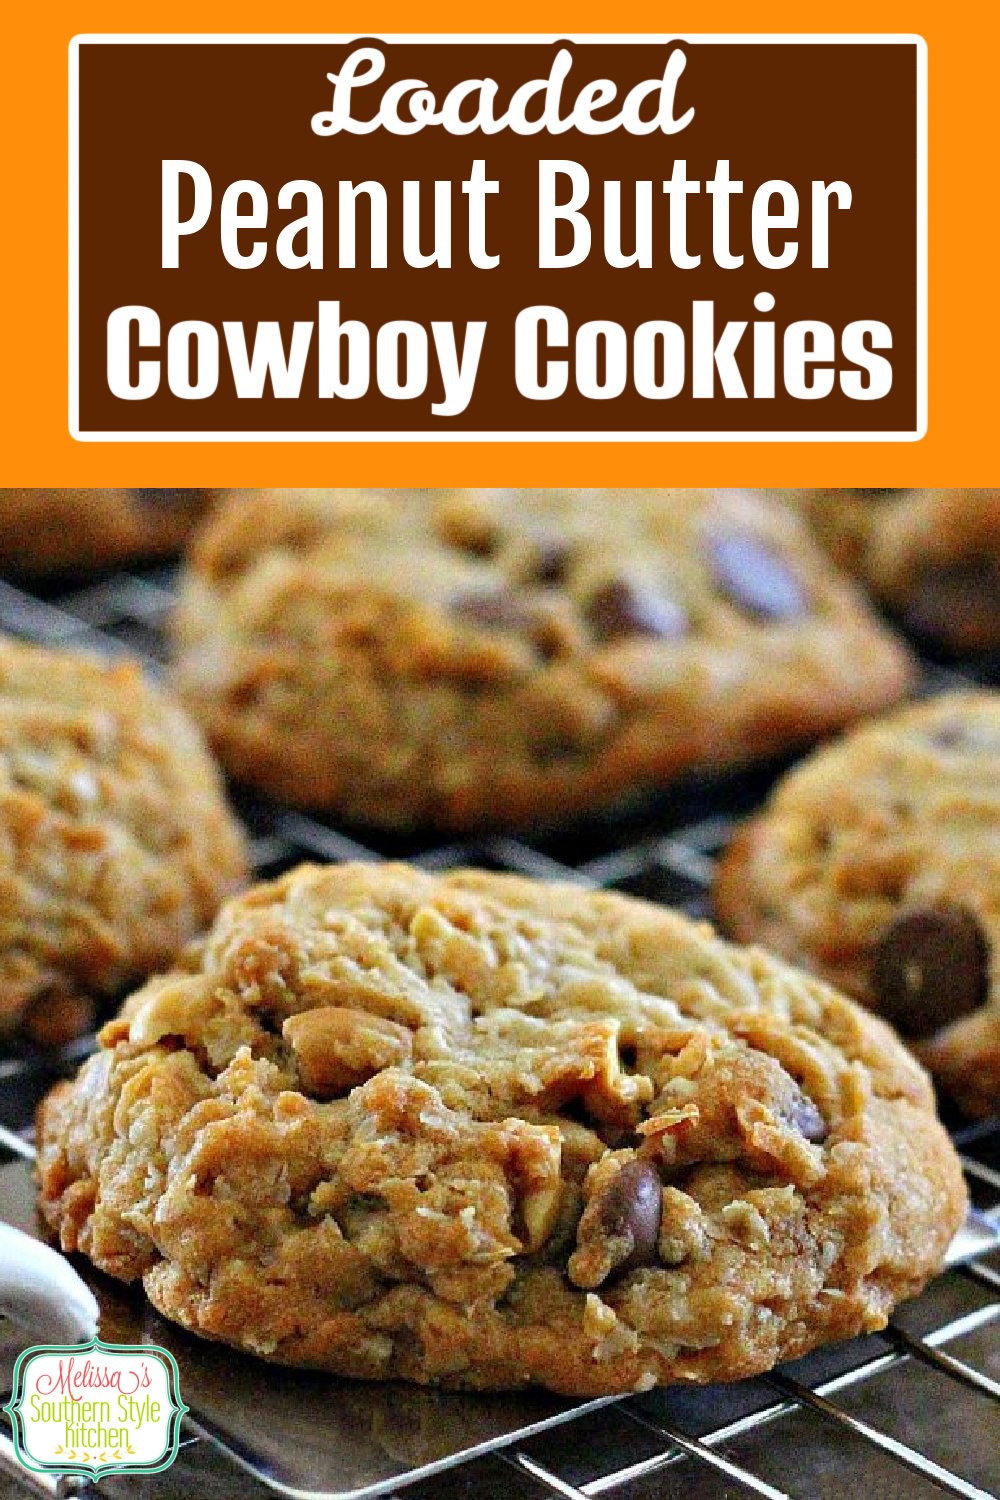 These loaded-up jumbo Peanut Butter Cowboy Cookies are impossible to resist #cowboycookies #peanutbuttercookies #cookierecipes #cookies #chocolatechips #peanuts #holidaybaking #holidays #desserts #dessertfoodrecipes #peanutbutter #southernfood #southernrecipes via @melissasssk